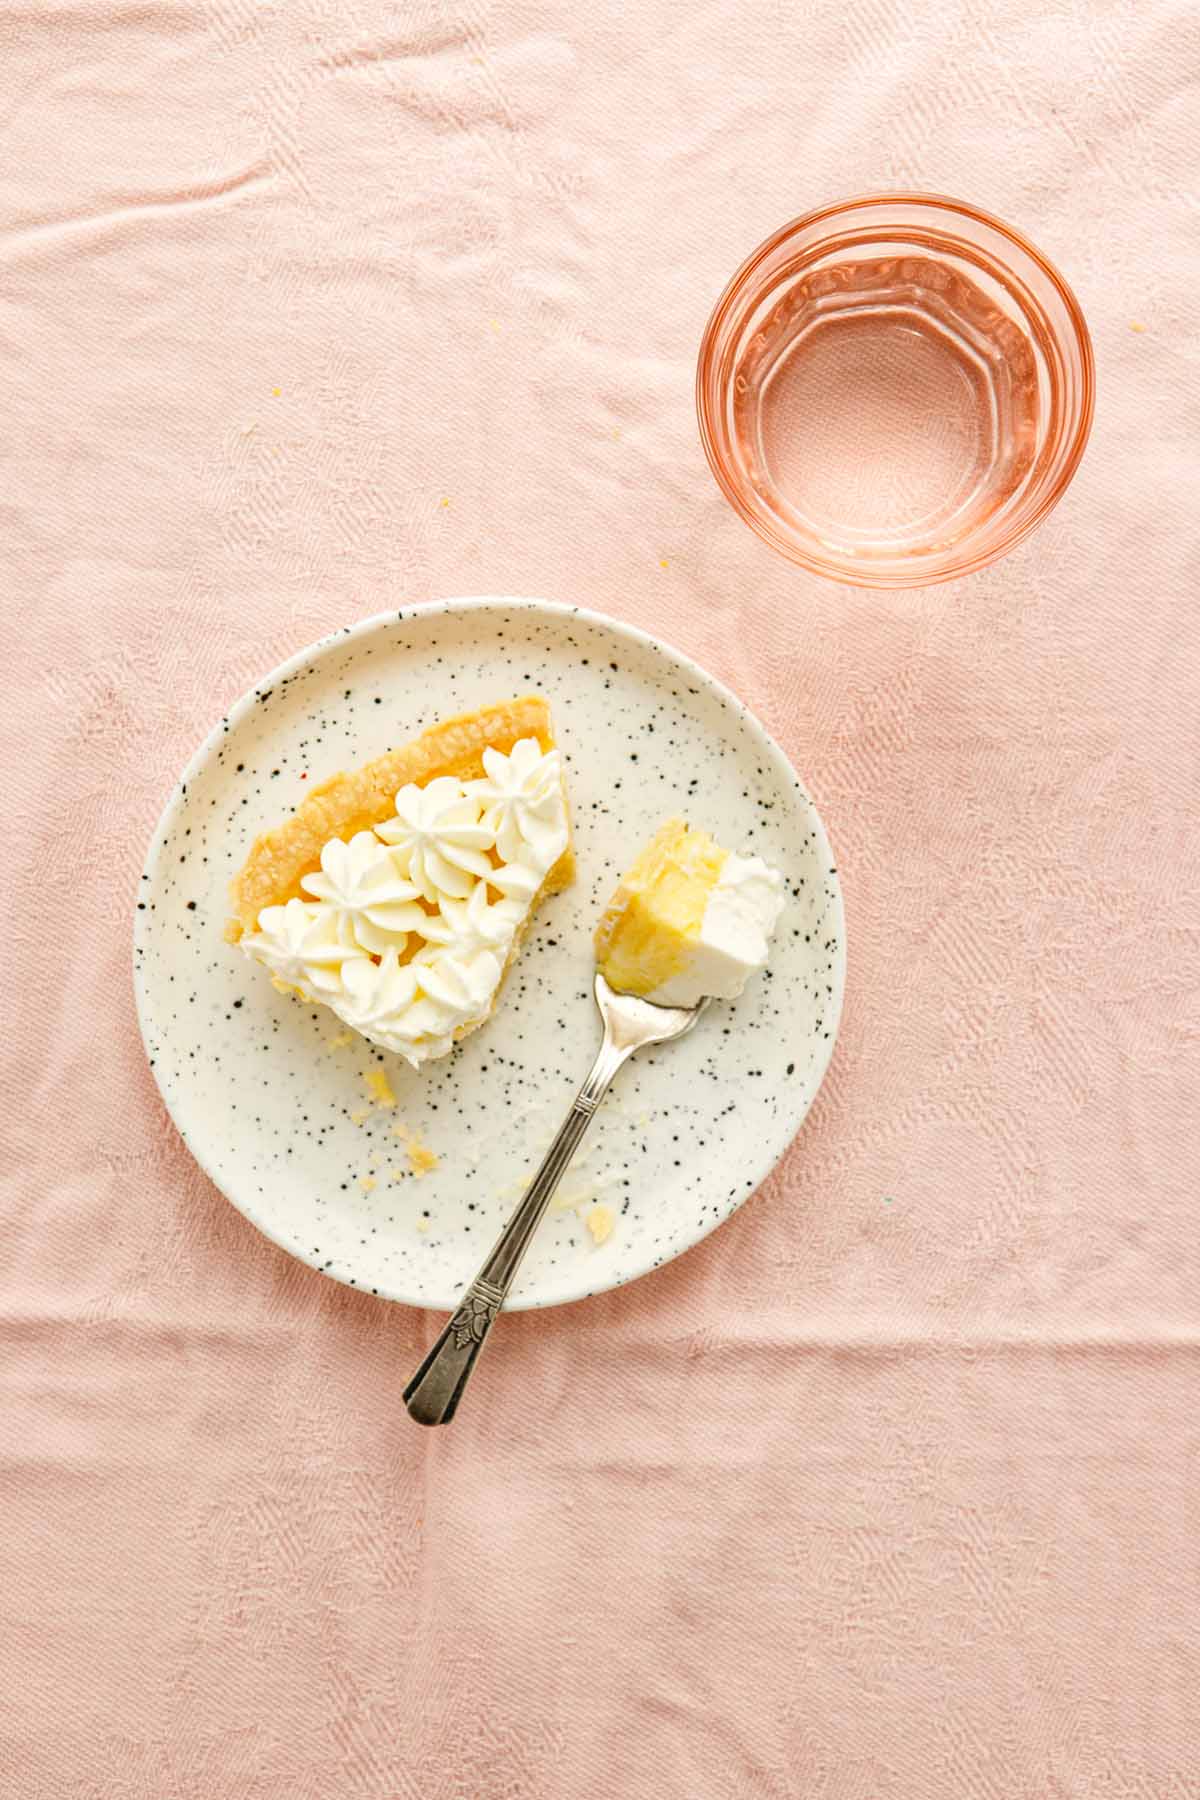 A slice of lemon chess pie on a small white plate on a table covered in pink linen with a pink glass filled with water nearby.